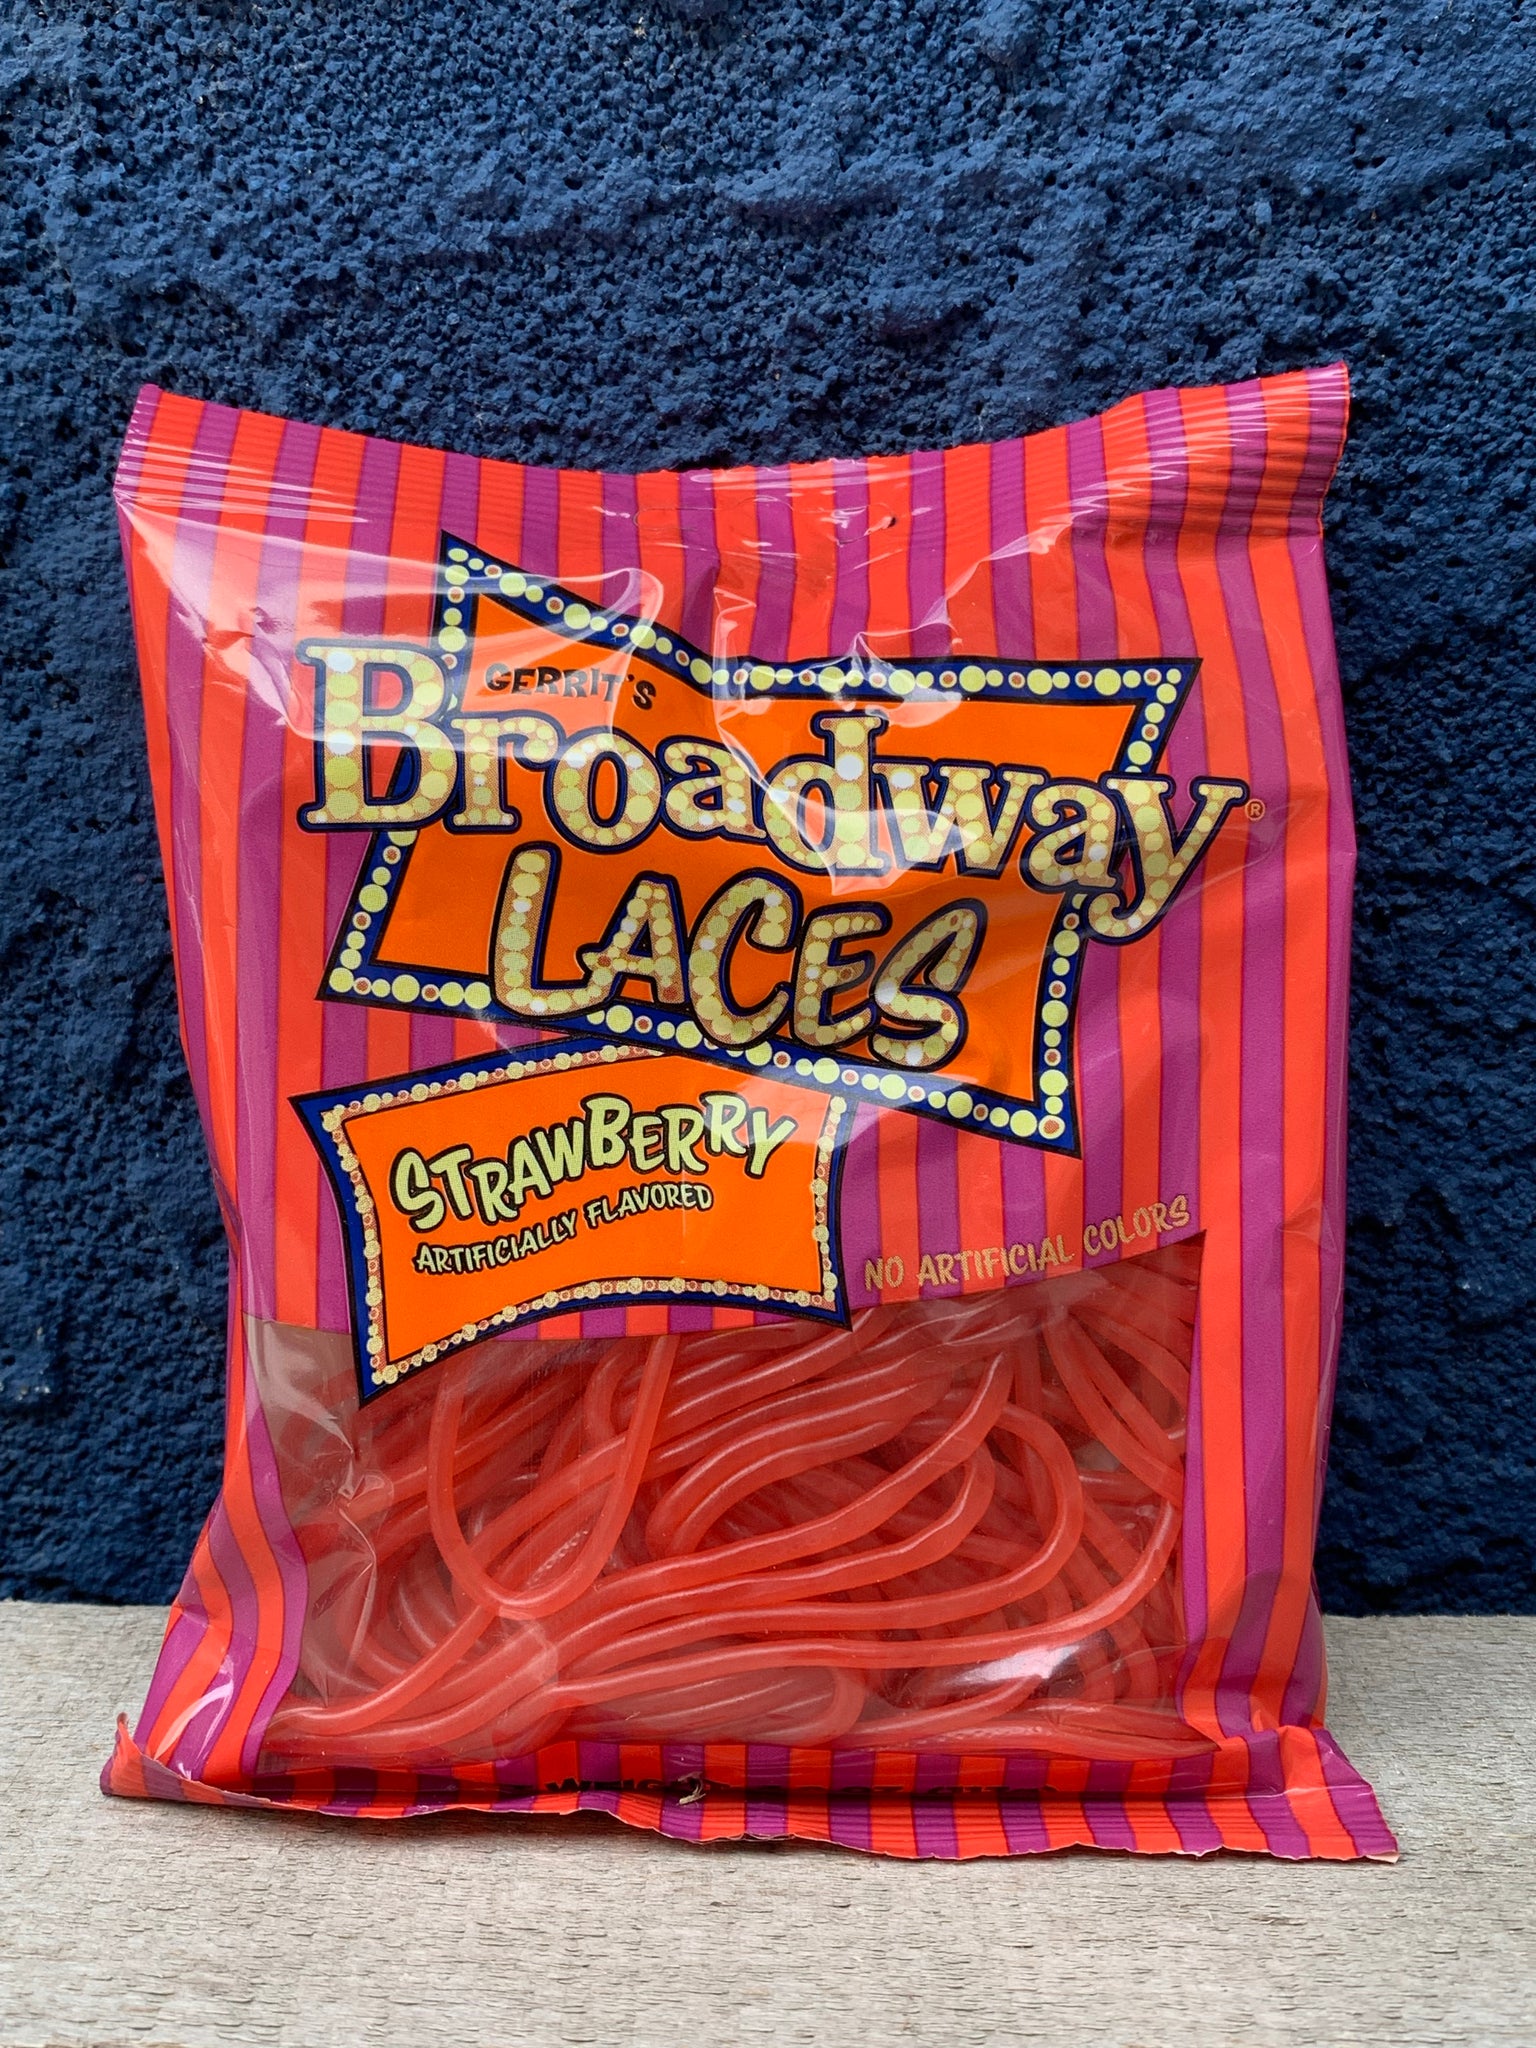 Gerrit’s Broadway Laces Strawberry